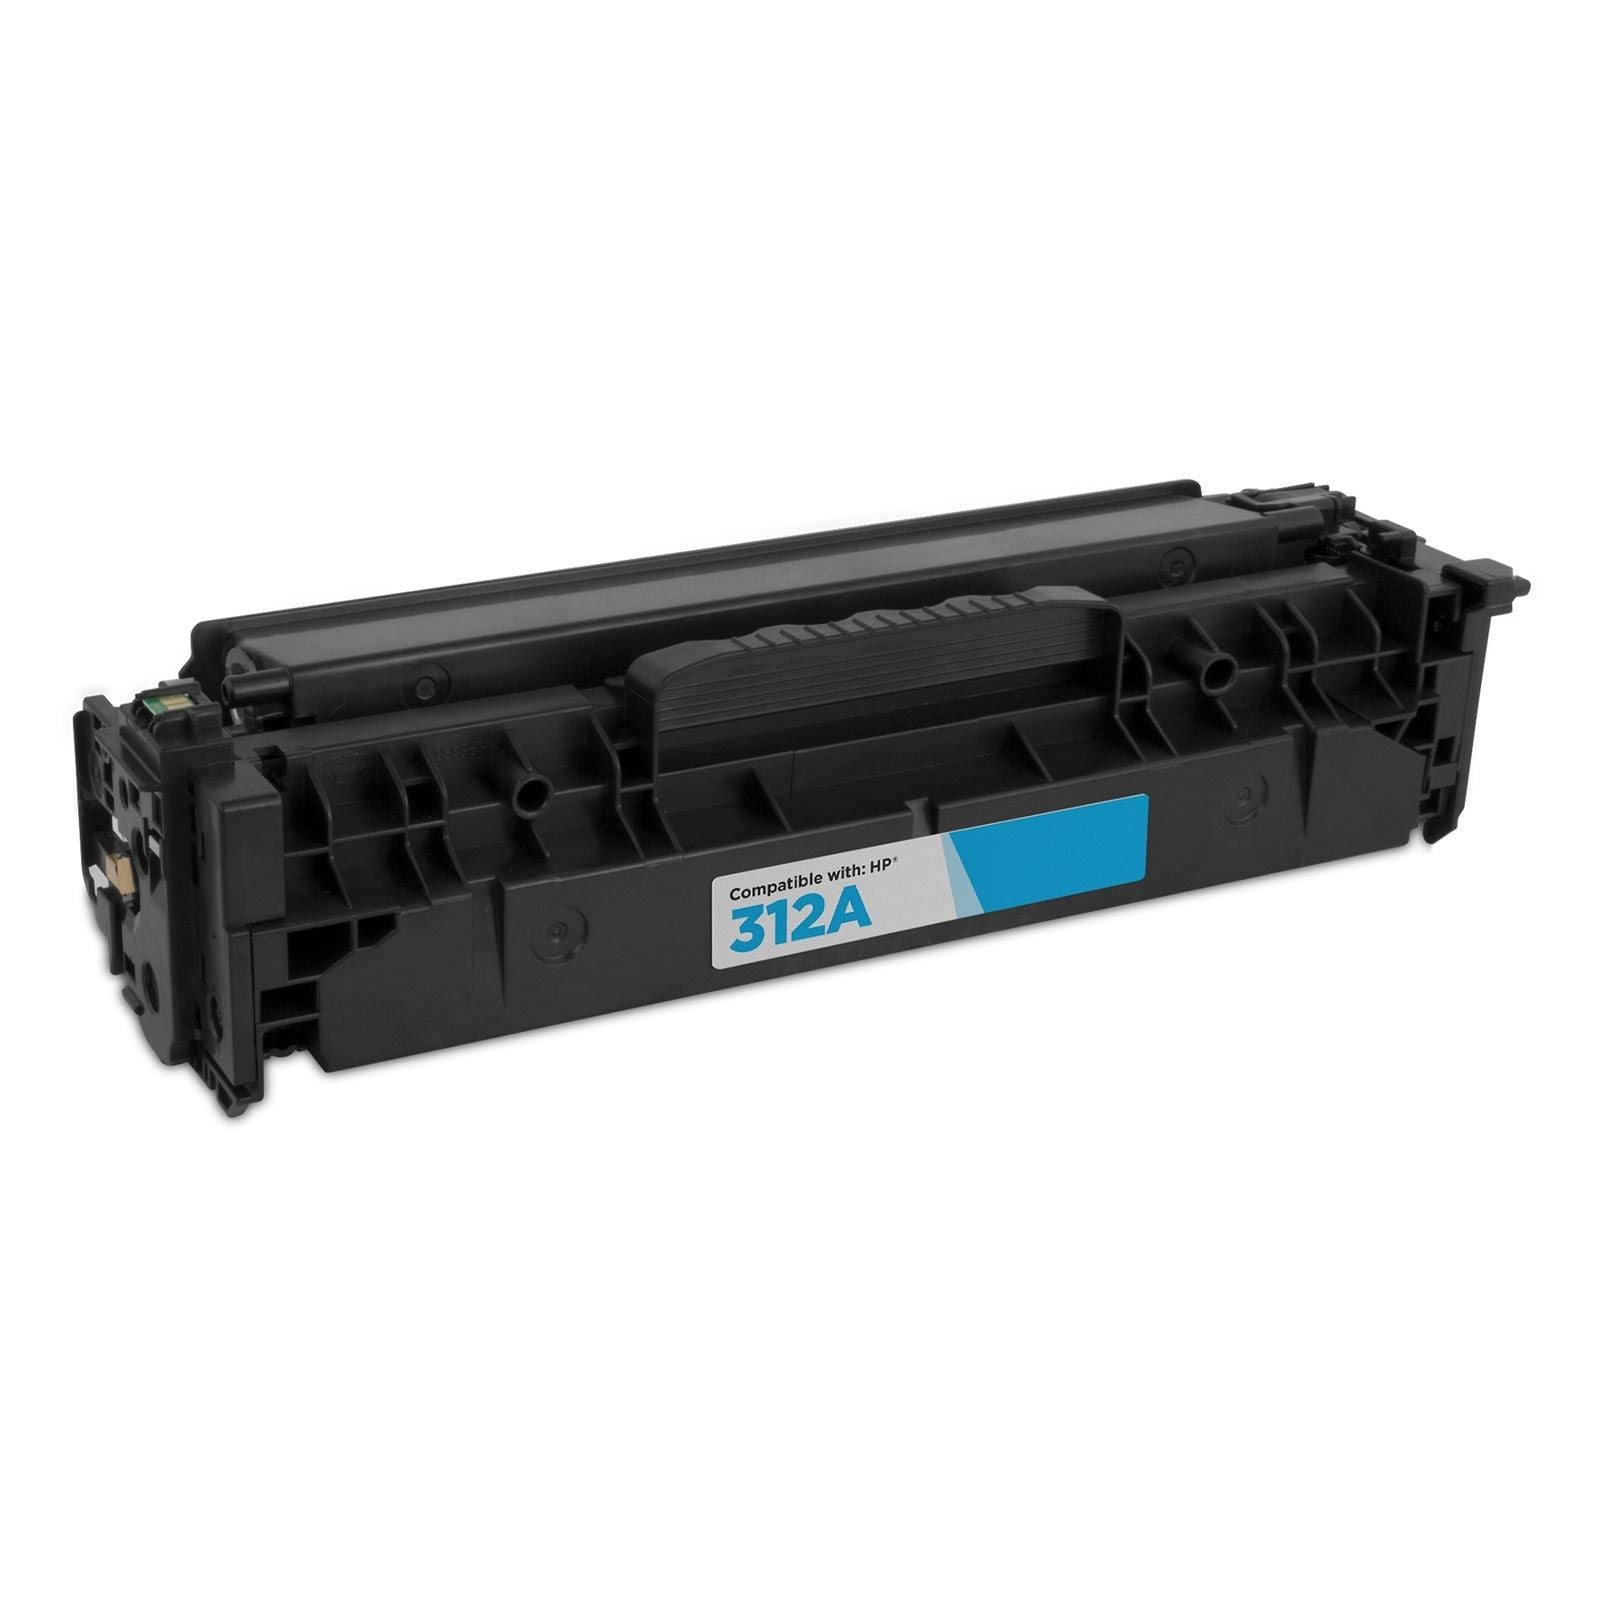 IMPERIAL BRAND Compatible toner cartridge for HP CYAN 312A TONER 2,700 PAGES